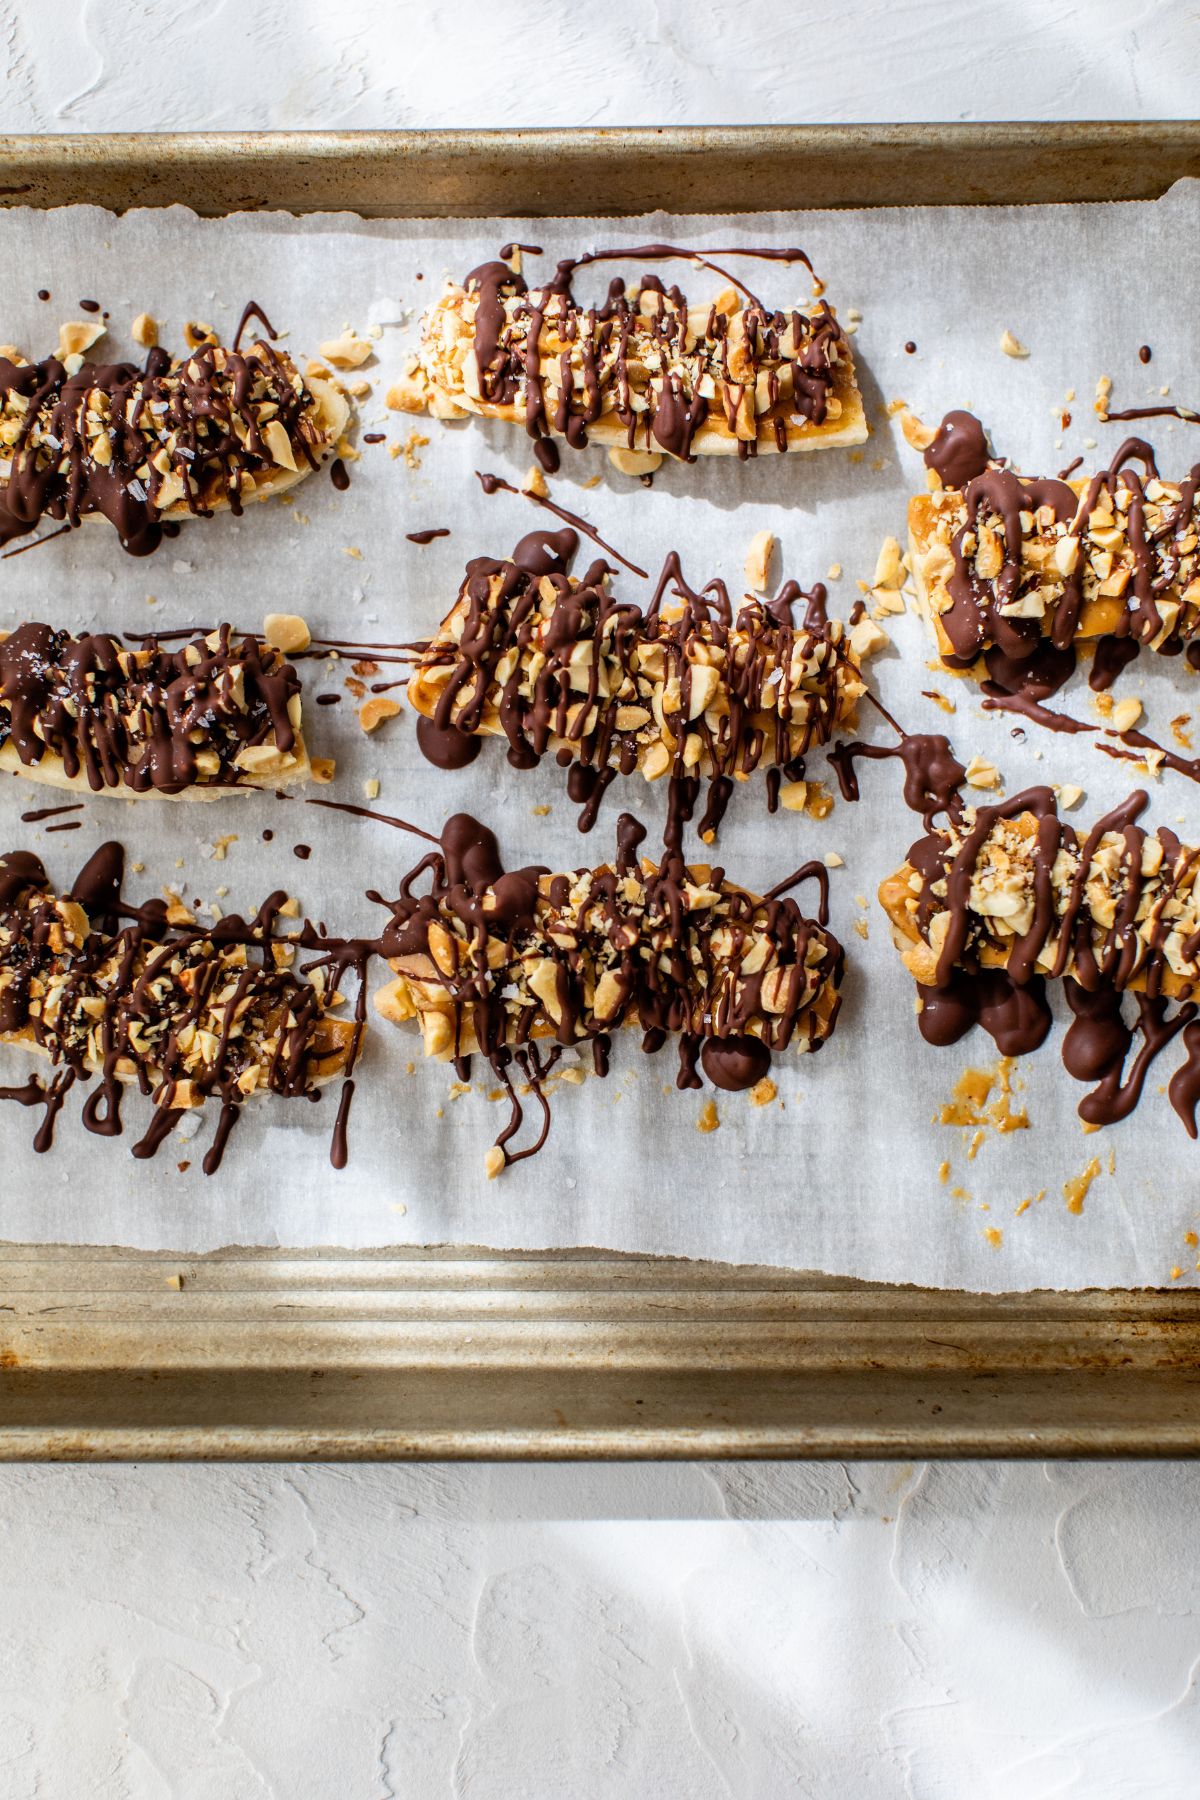 Bananas covered with peanut butter and chocolate.